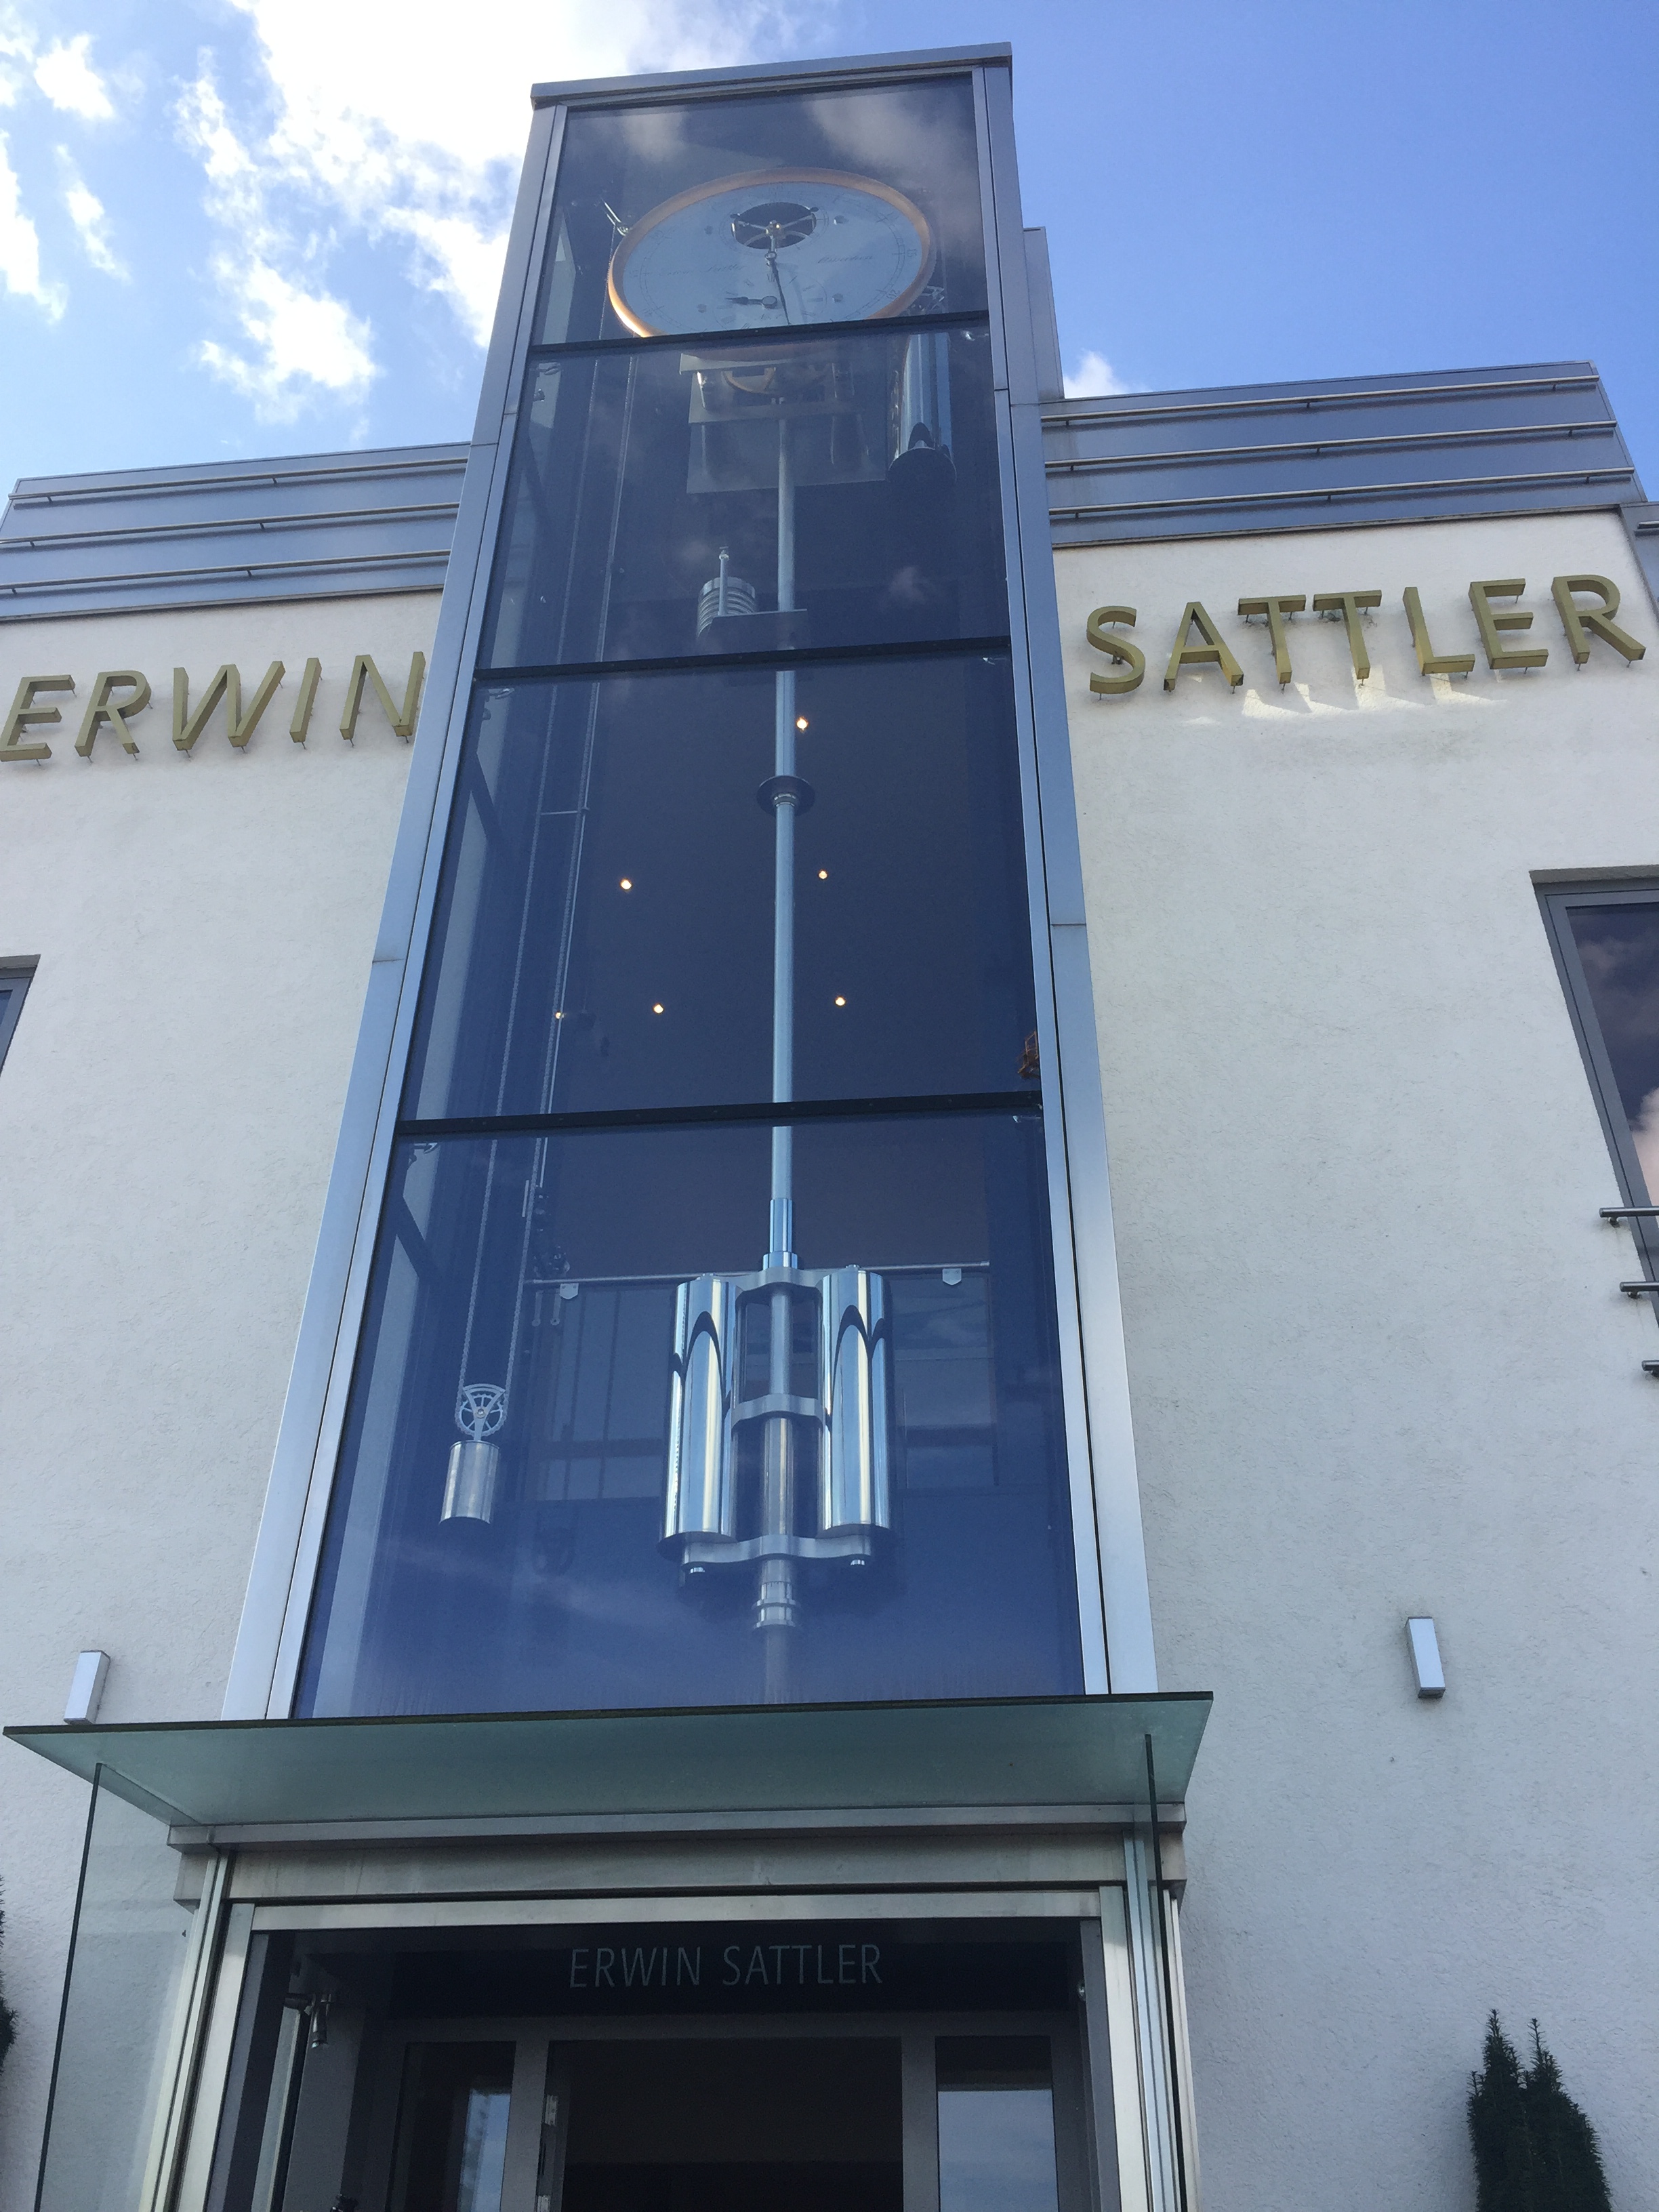 The world’s largest working regulator hanging over the front entrance of the Erwin Sattler manufactory in Munich